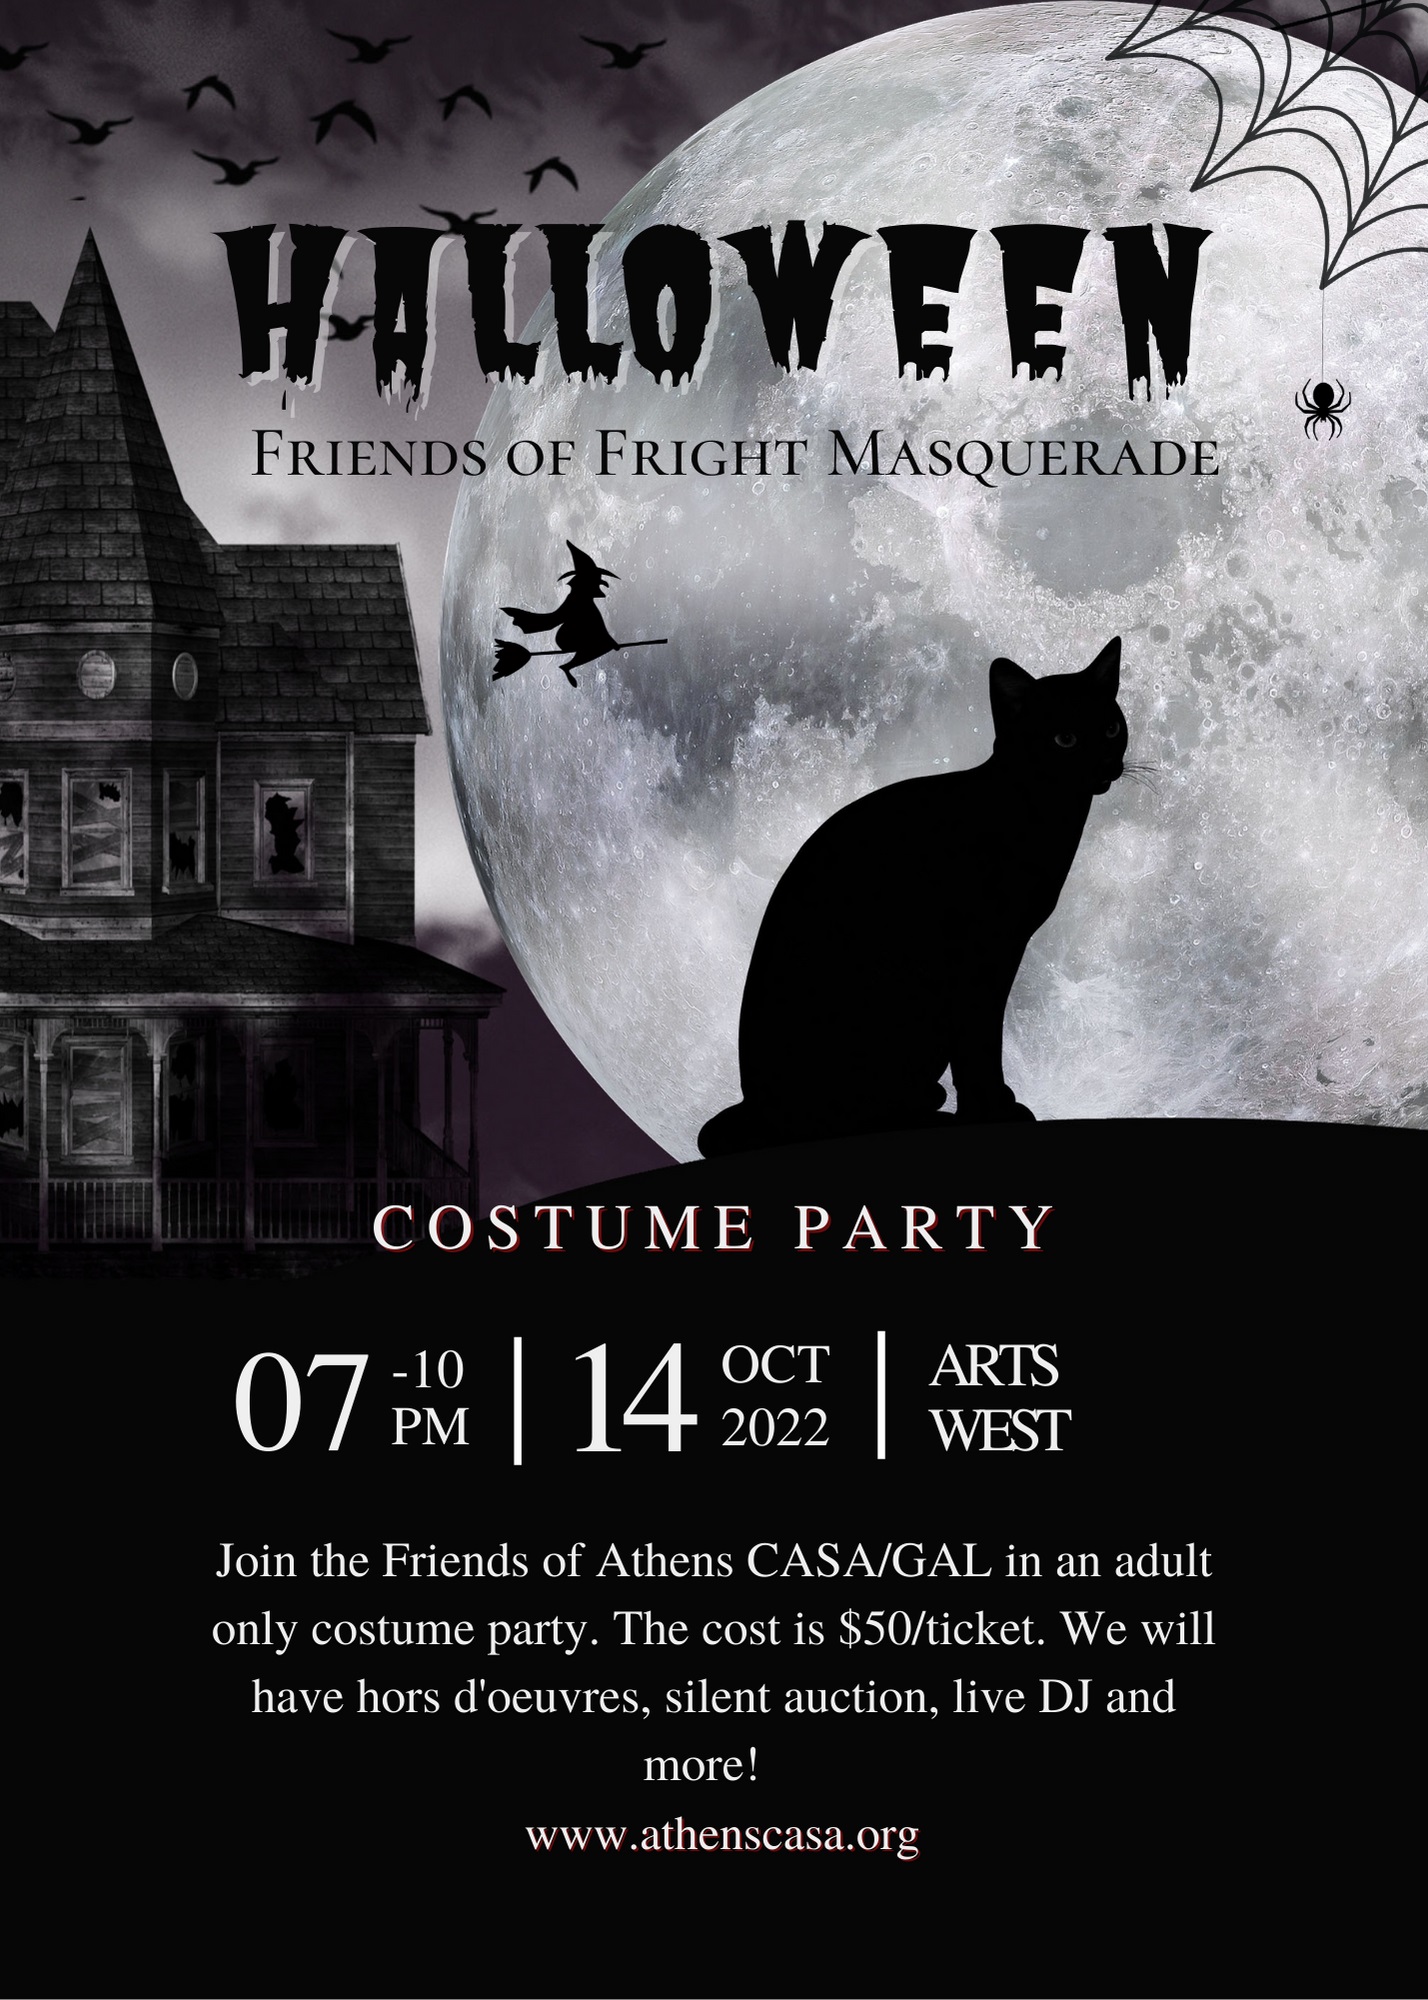 A flyer reading: Costume Party Benefitting CASA/GAL Join the Friends of ATHENS CASA/GAL for an adult only costume party. Registration is $50 per person and includes hors d'oeuvres, beats by DJ Lodrom, dancing, a silent auction, soft drinks and adult beverages, and more! Friday October 14th | 7:00 PM Arts/West 132 W. State Street in Athens ALL PROCEEDS BENEFIT ATHENS CASA/GAL https://www.athenscasa.org/ There is apicture of a black cat on a castle wall in the background.